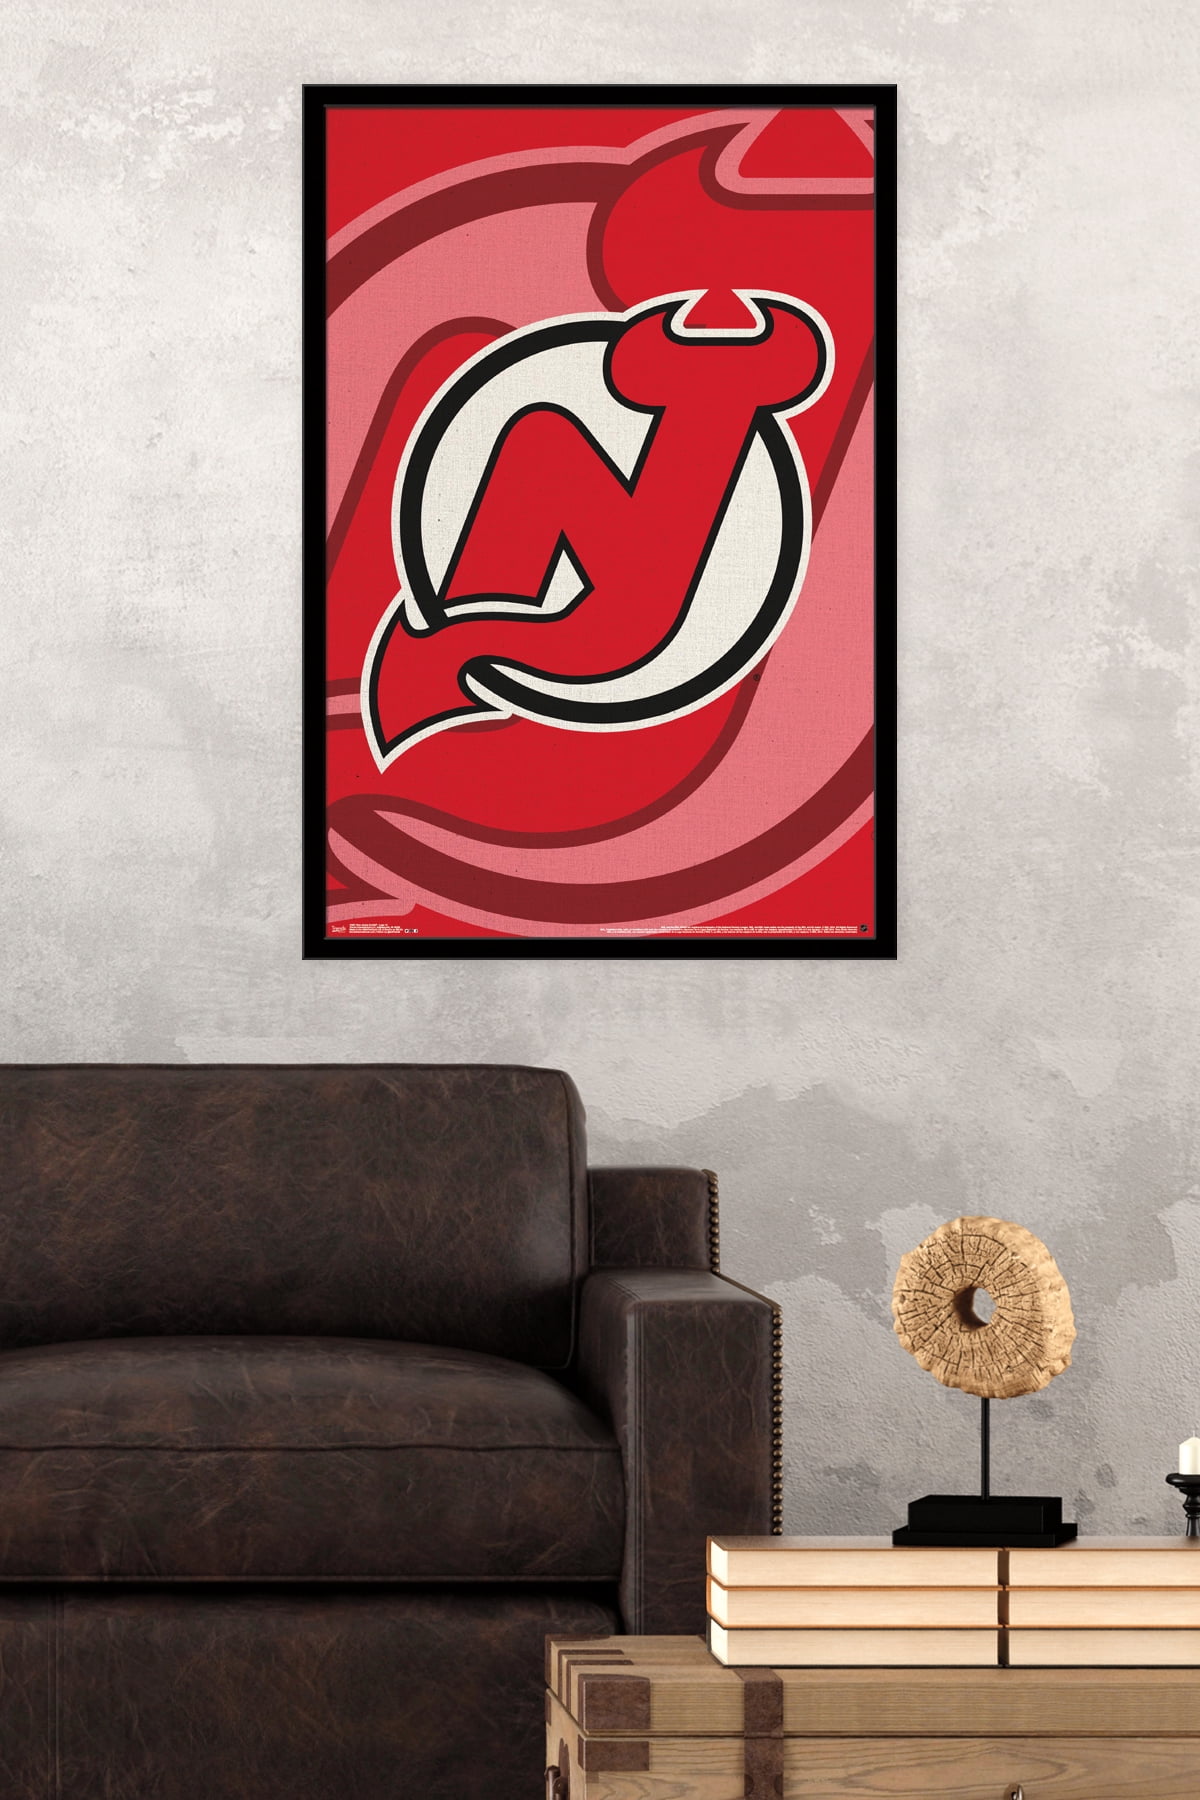 New Jersey Devils Mascot 95/96 Poster